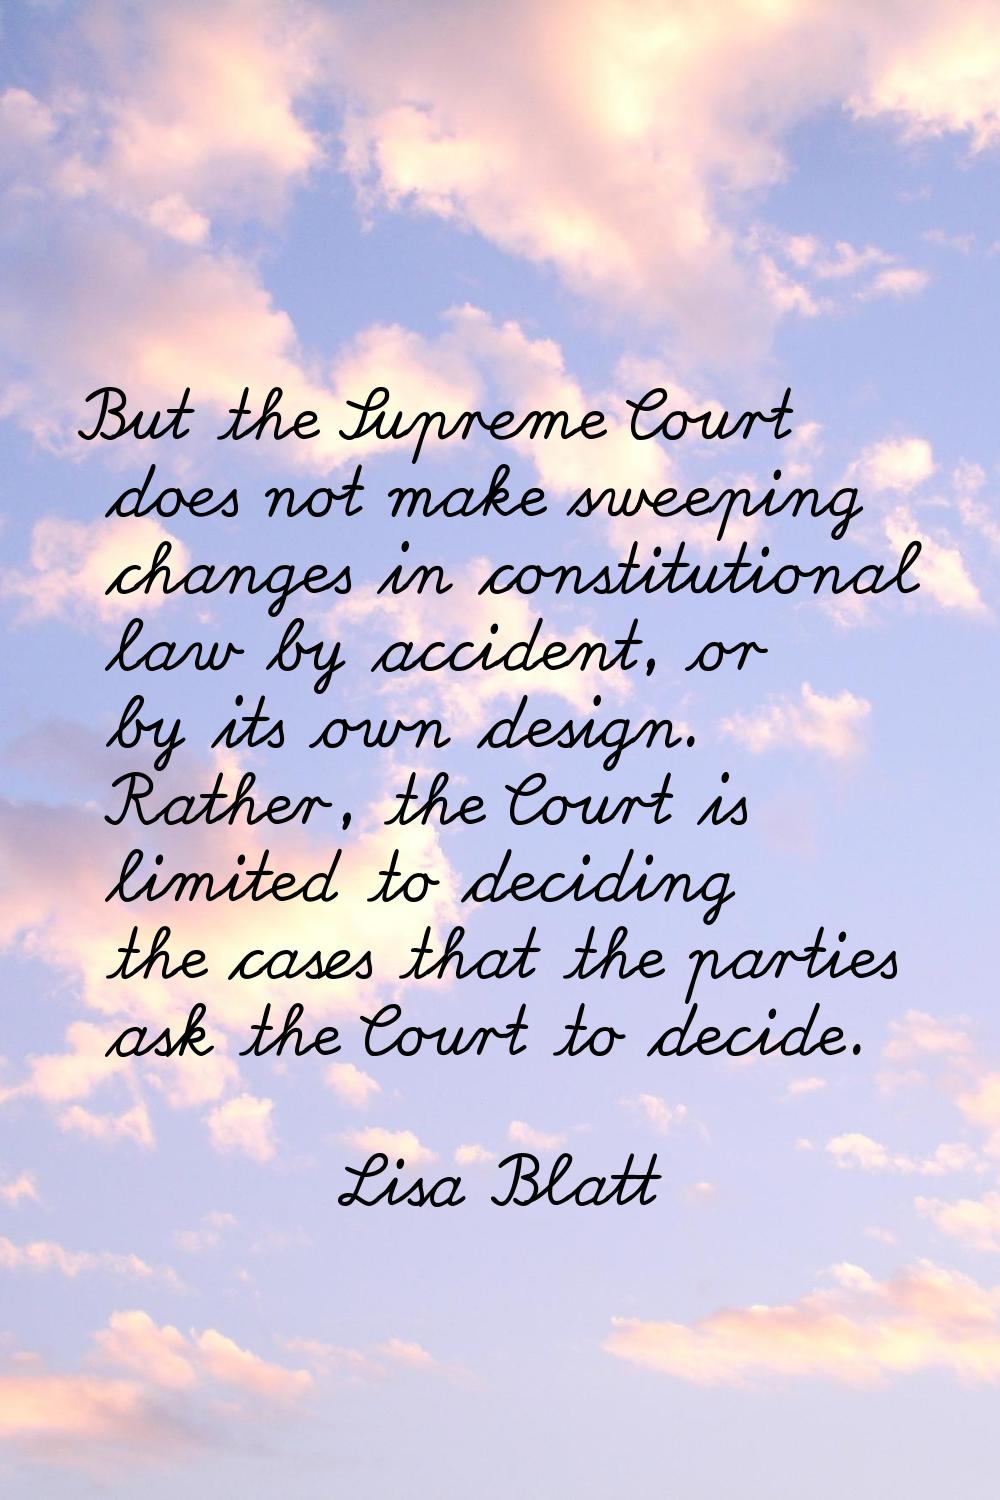 But the Supreme Court does not make sweeping changes in constitutional law by accident, or by its o